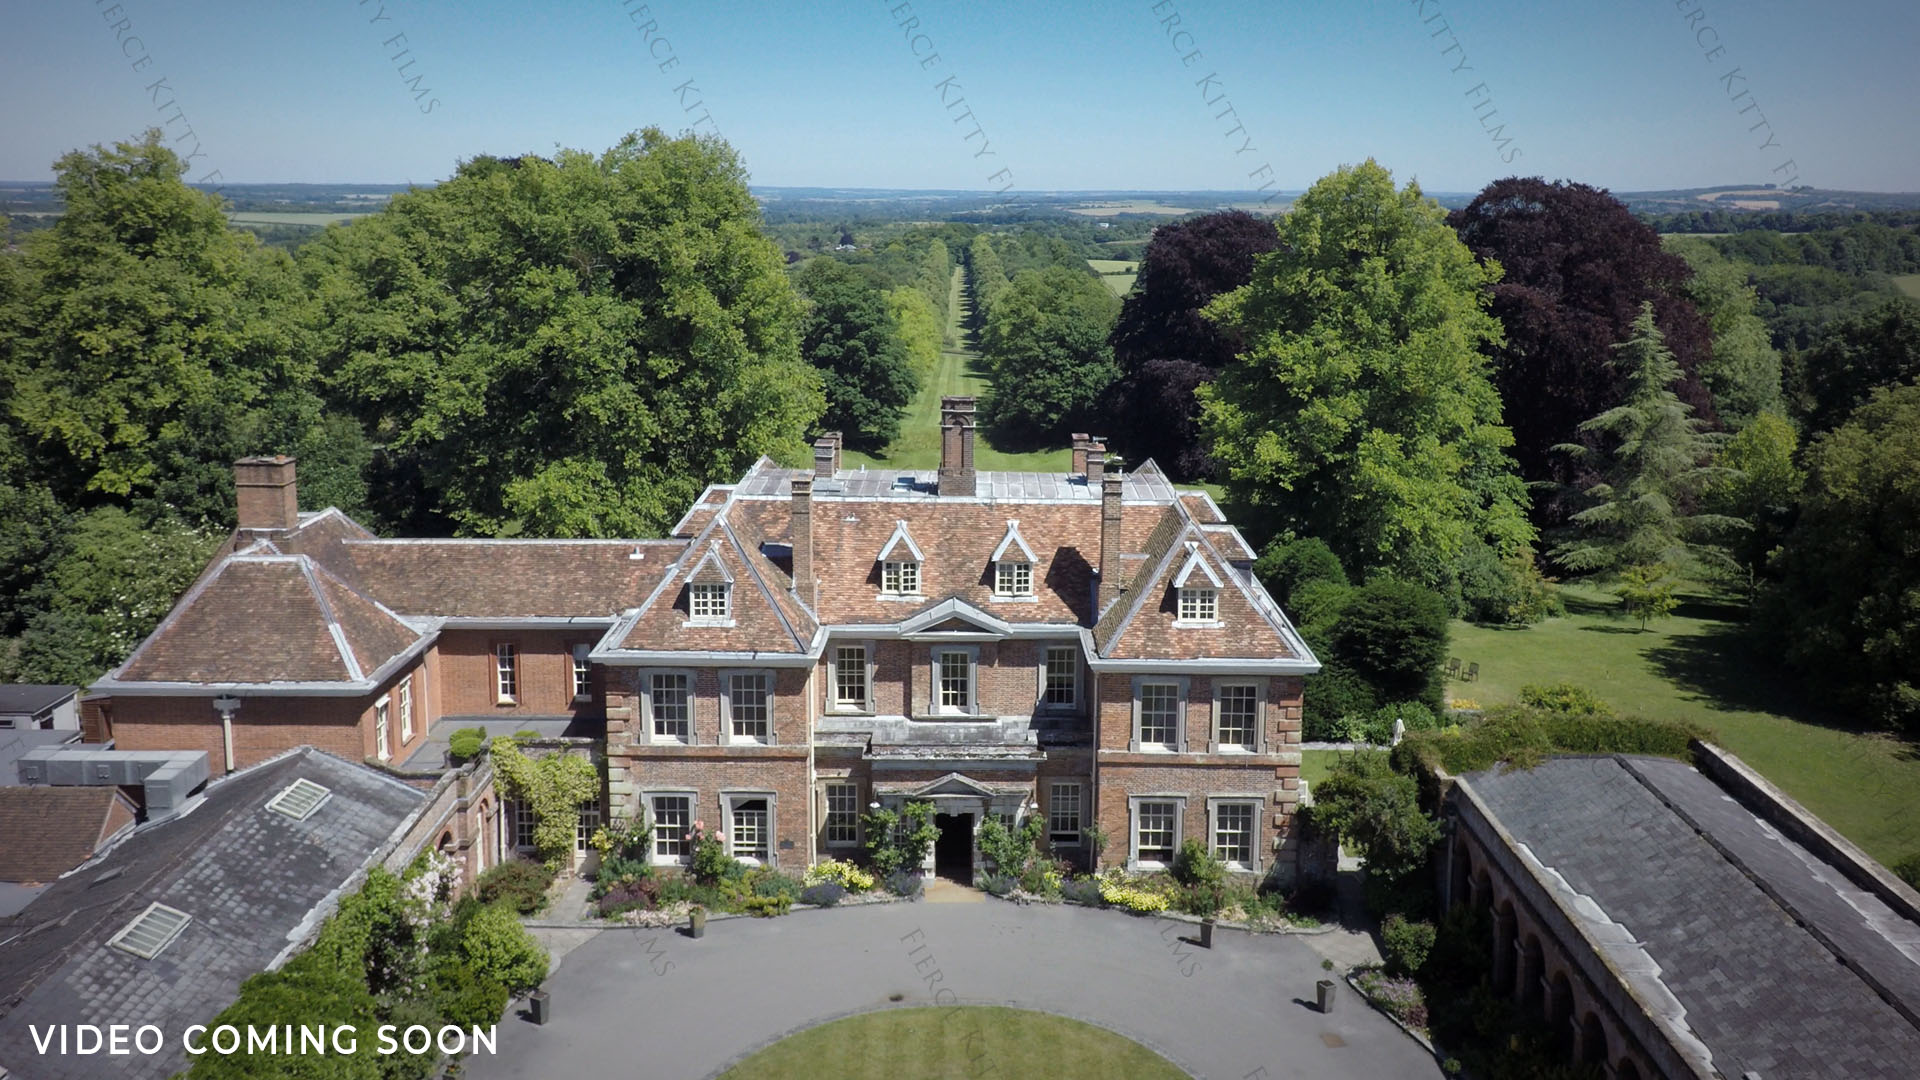 Lainston House Hotel Aerial Drone